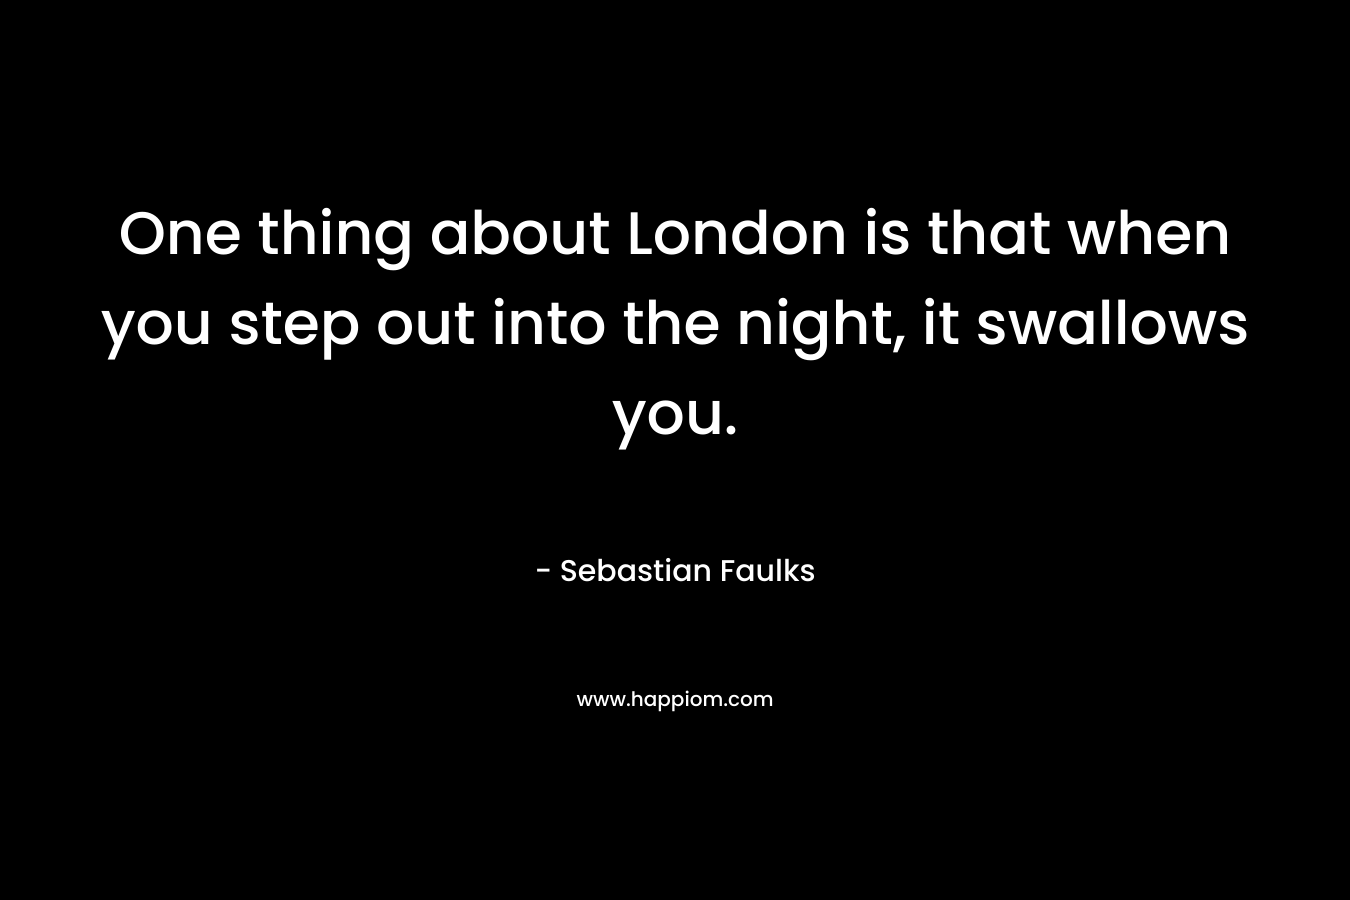 One thing about London is that when you step out into the night, it swallows you.